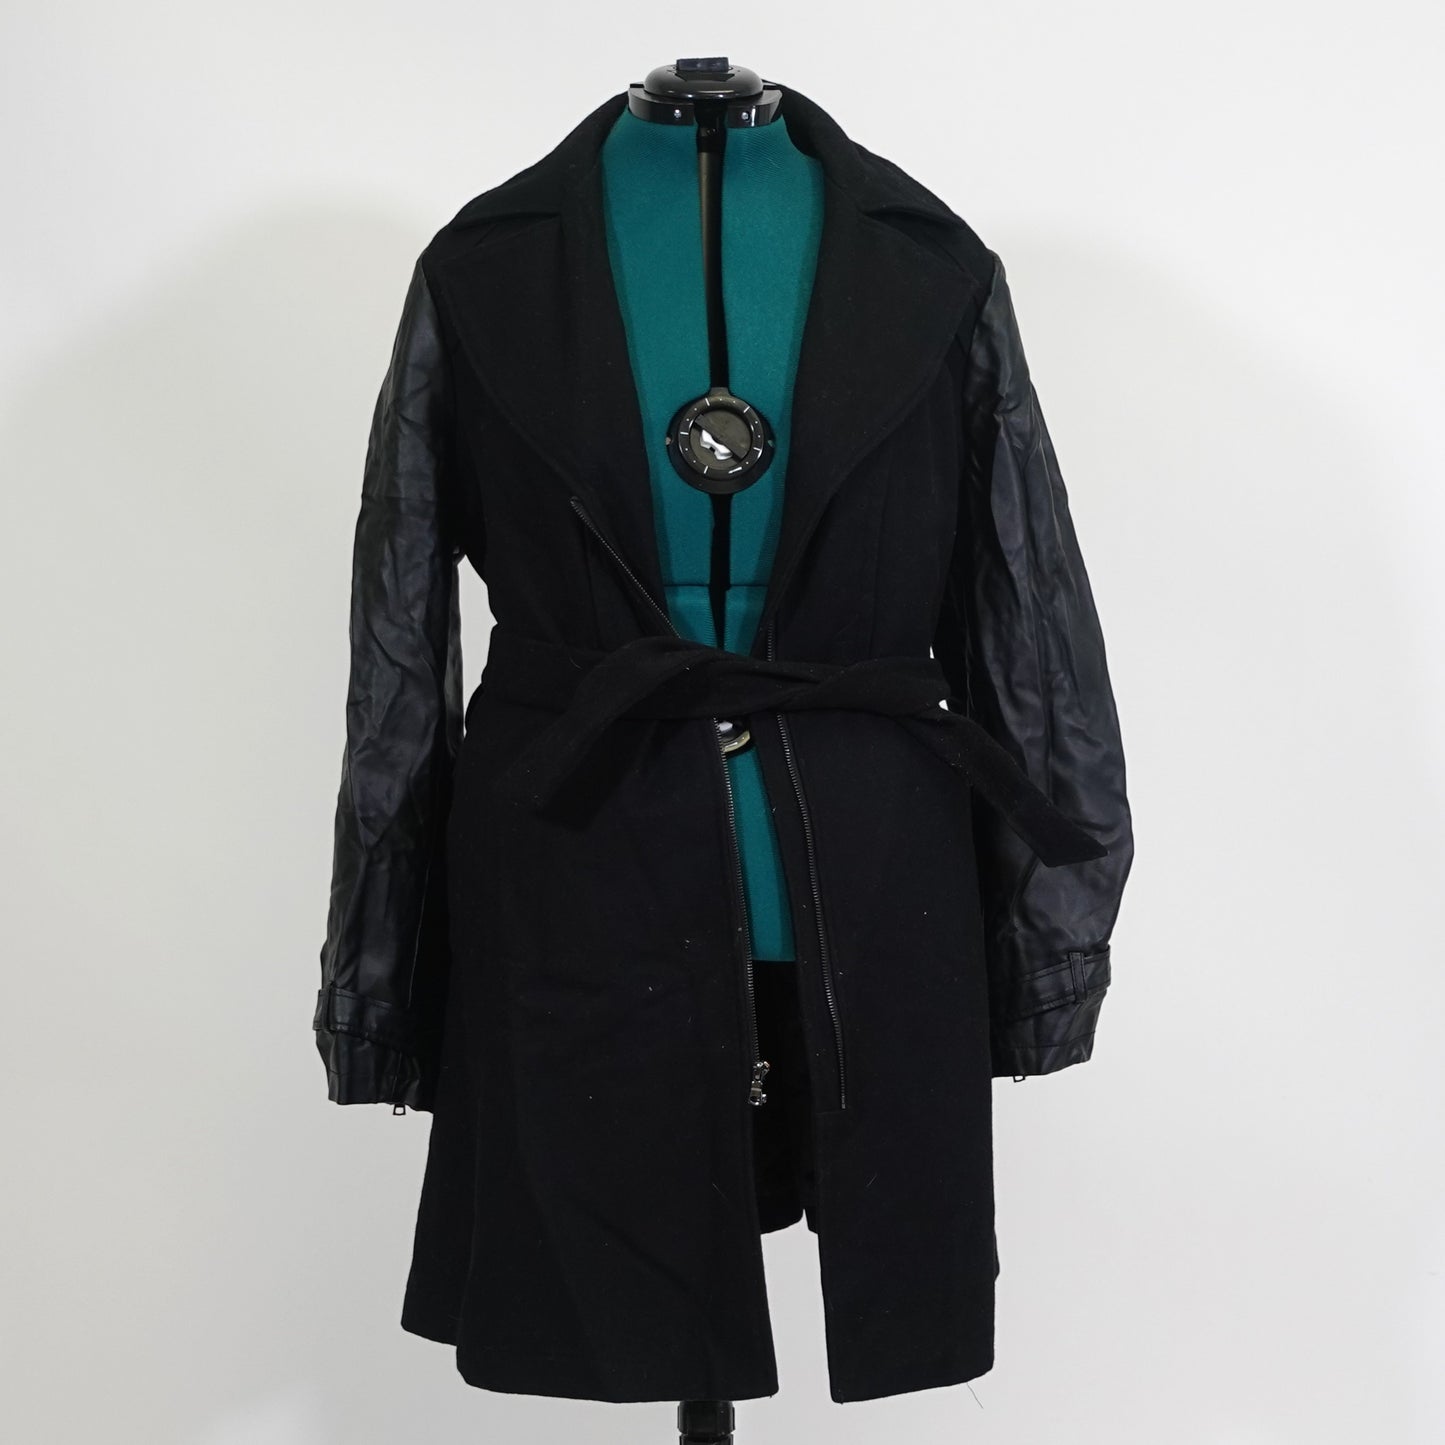 Black Zip Up Trench Coat with Faux Leather Sleeves